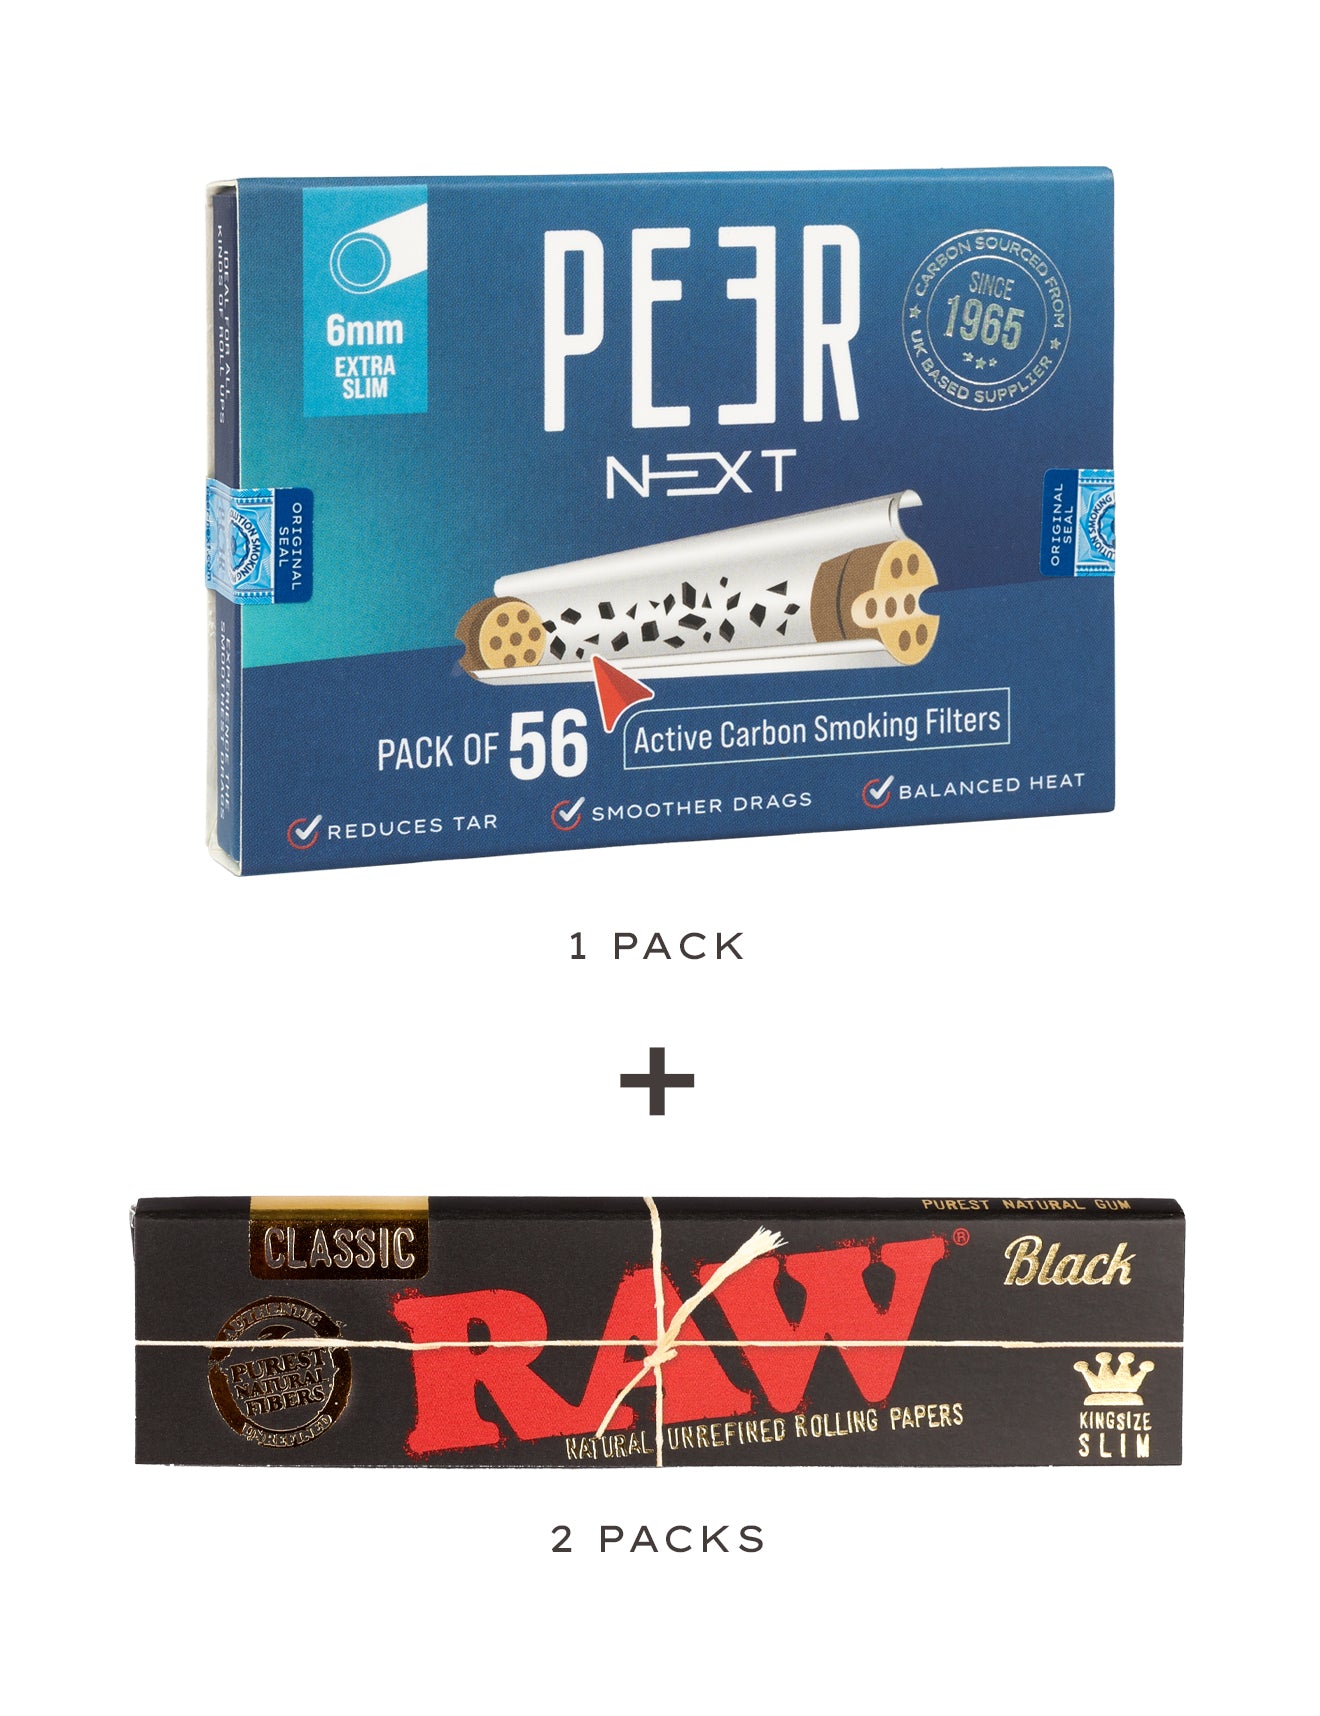 PEER Next combo pack of active carbon smoking filters and 2 RAW Black rolling paper